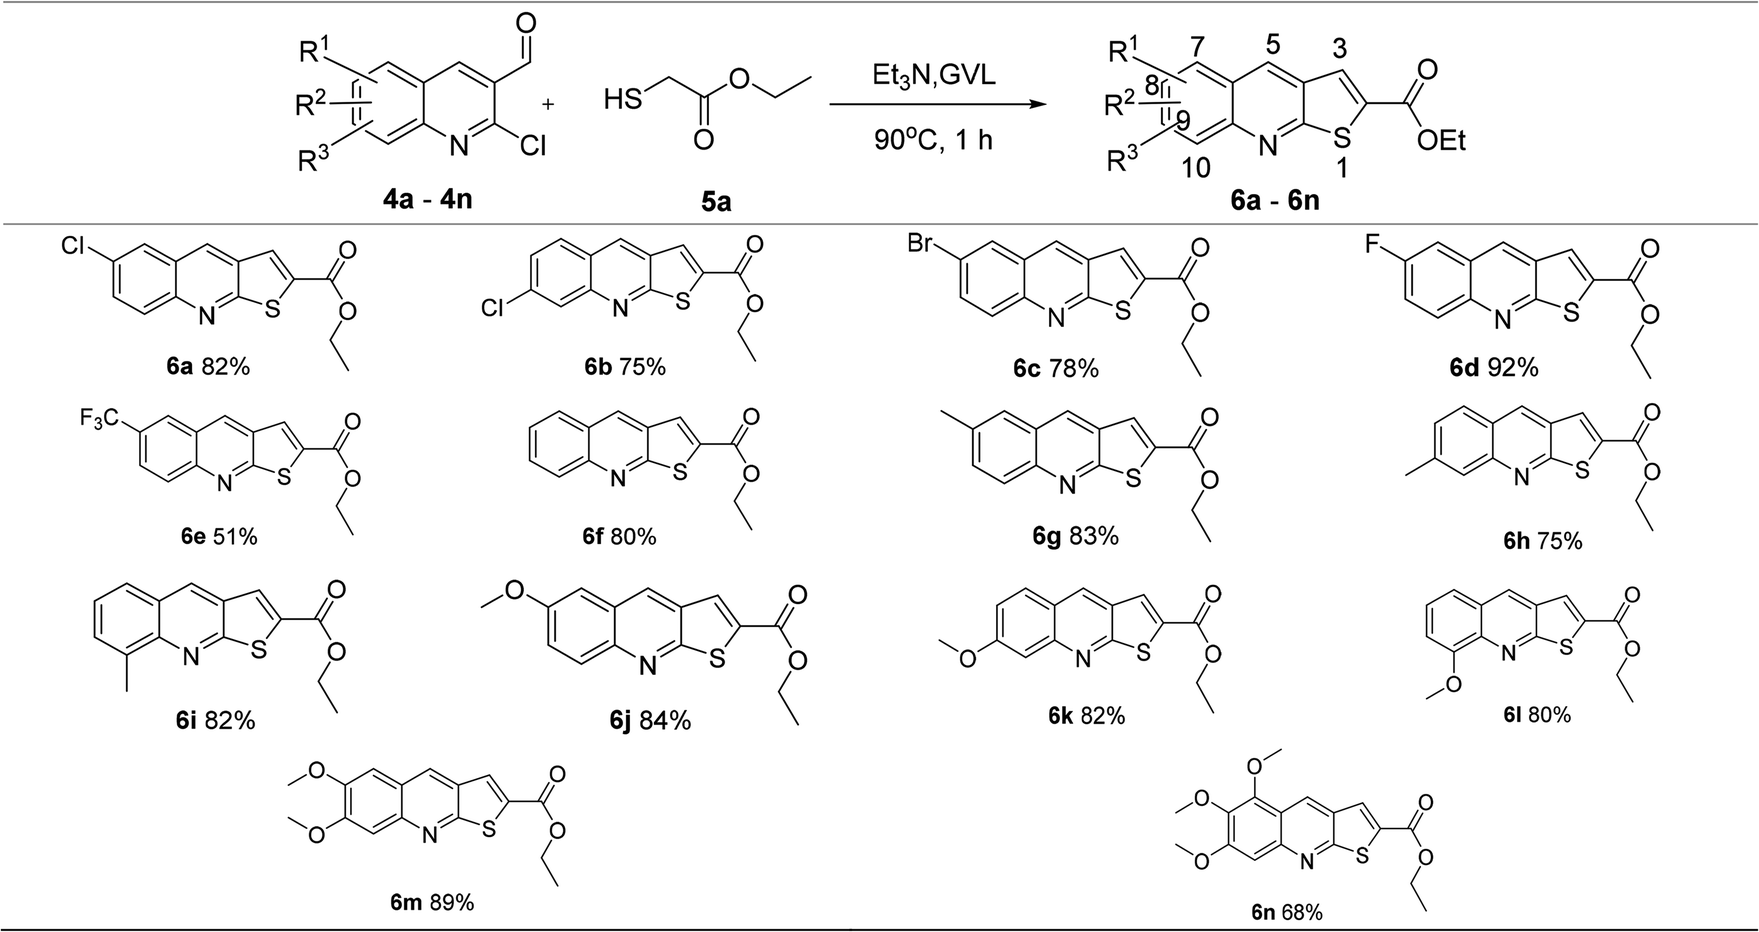 Synthesis Of 2 Ethoxycarbonylthieno 2 3 B Quinolines In Biomass Derived Solvent G Valerolactone And Their Biological Evaluation Against Protein Tyrosine Phosphatase 1b Rsc Advances Rsc Publishing